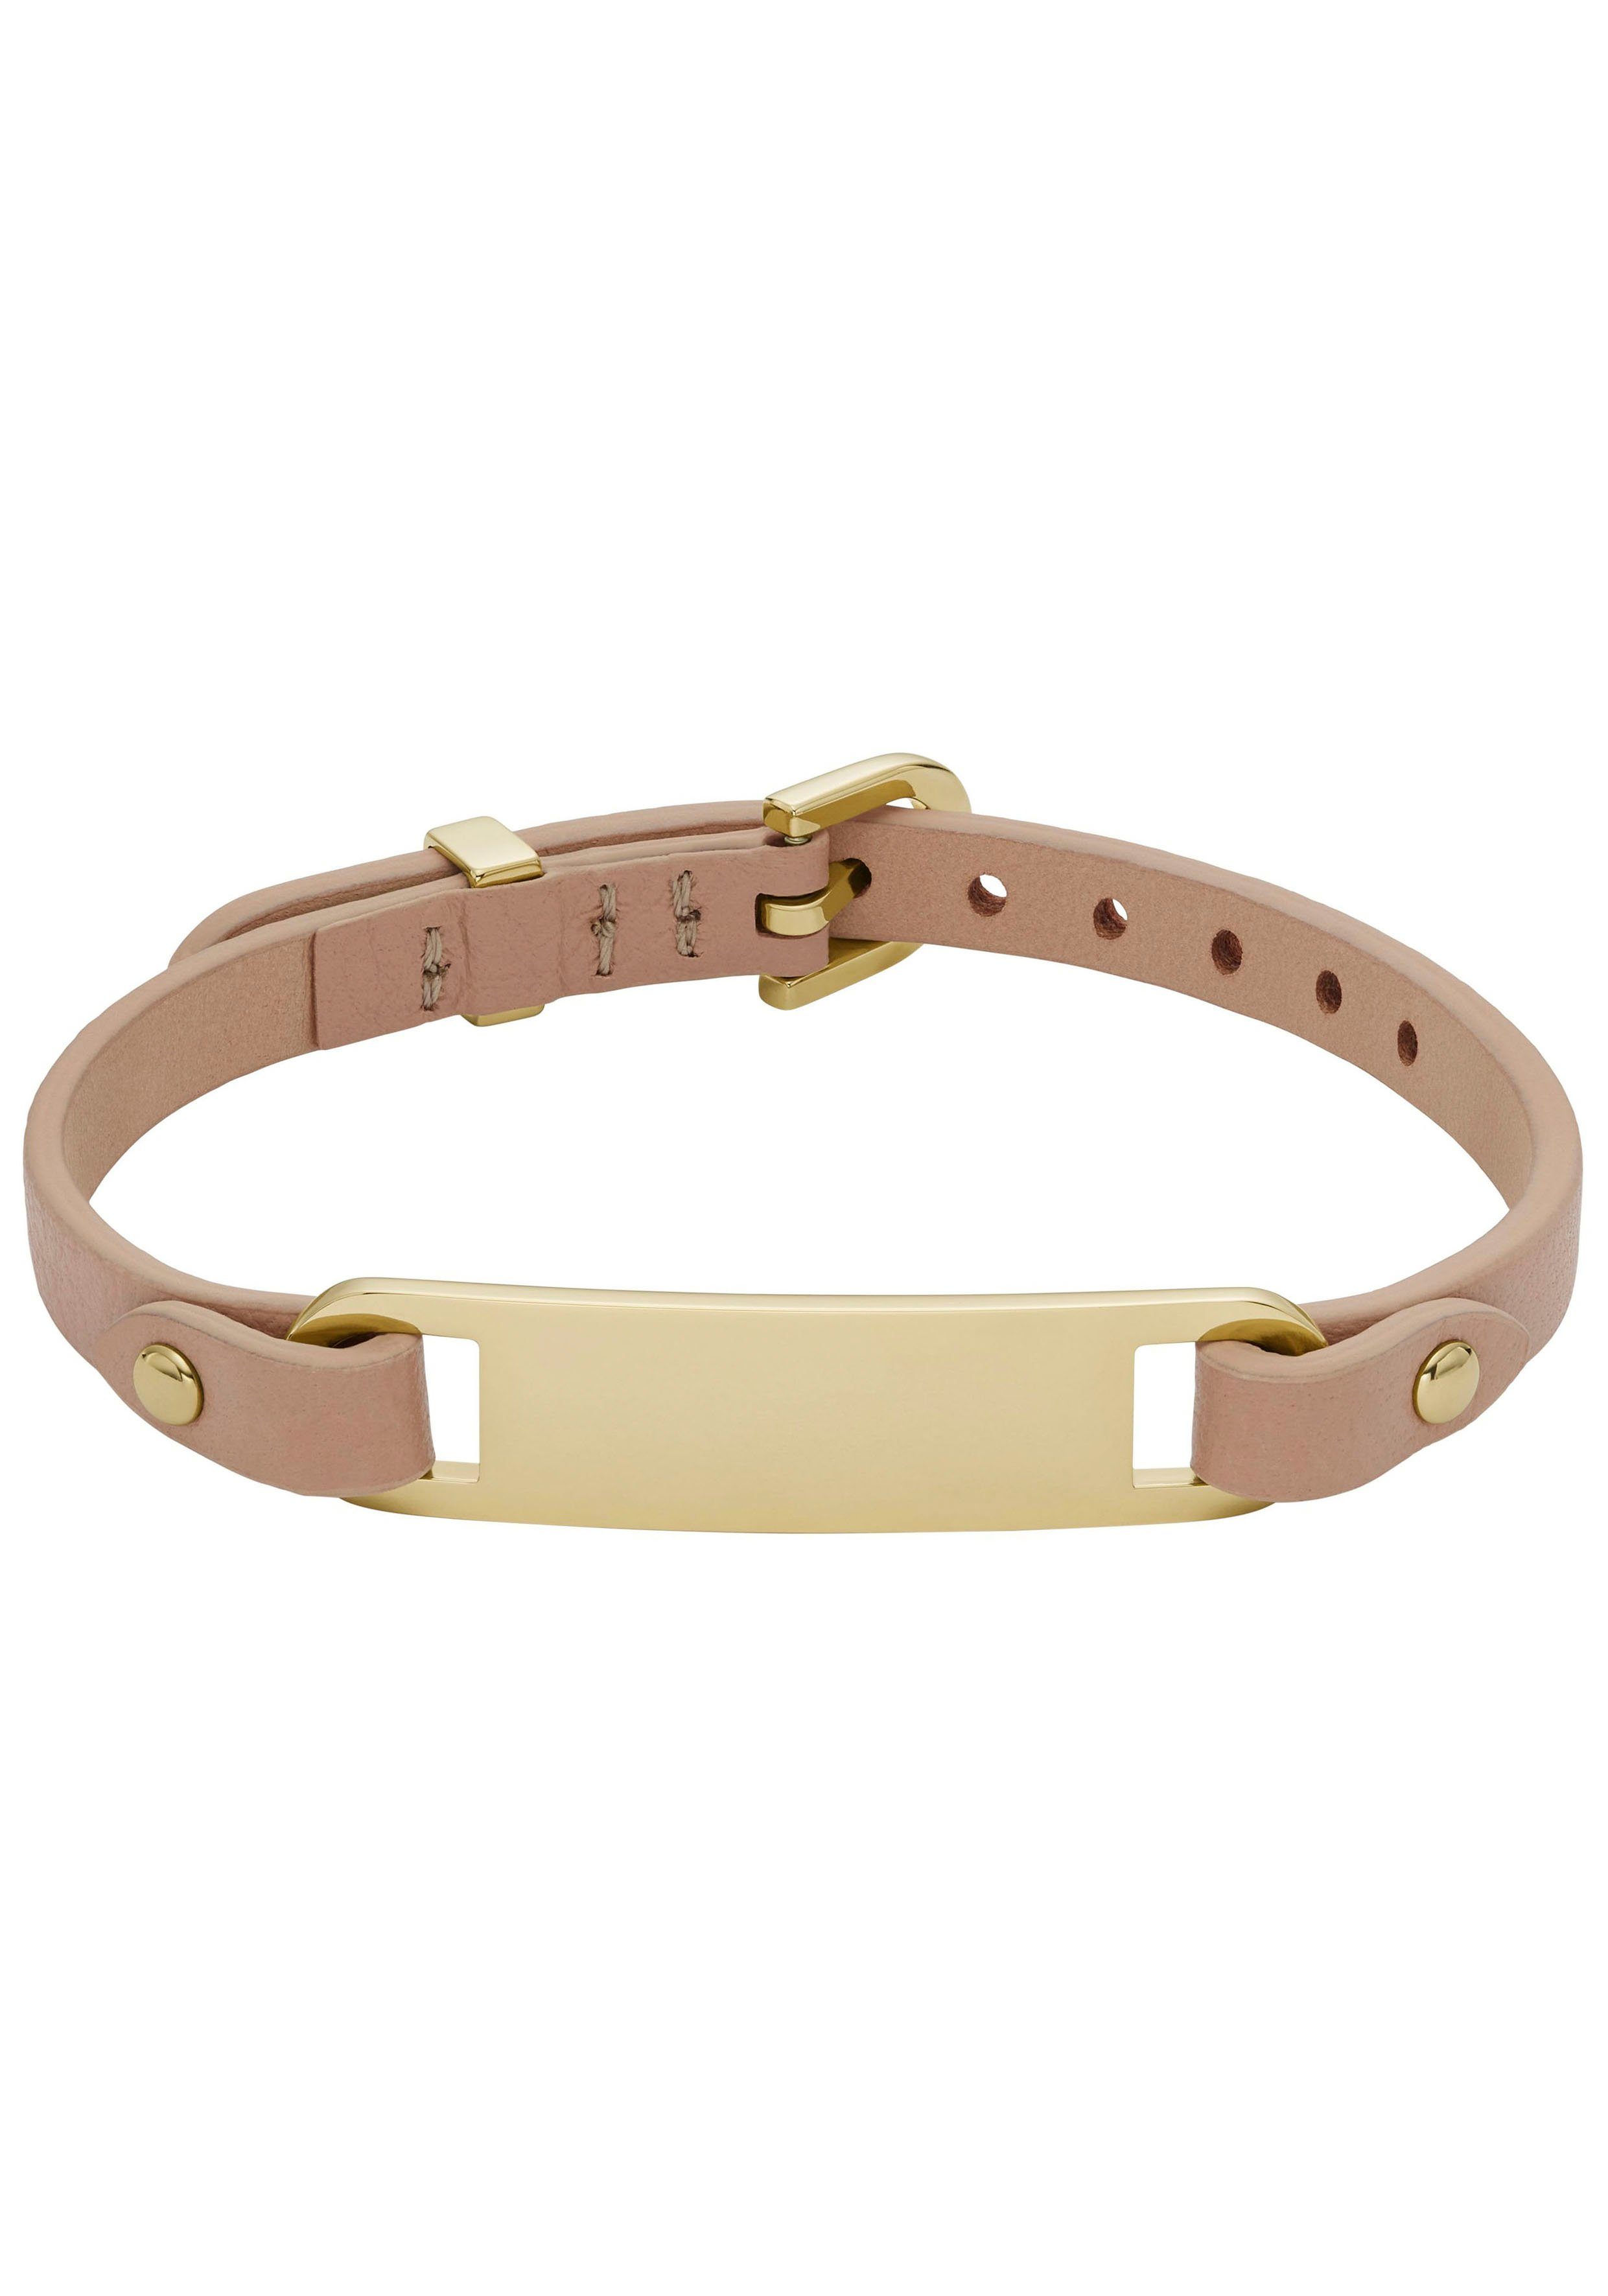 HERITAGE, gelbgoldfarben-nude JF04433710, Armband Fossil JF04434710